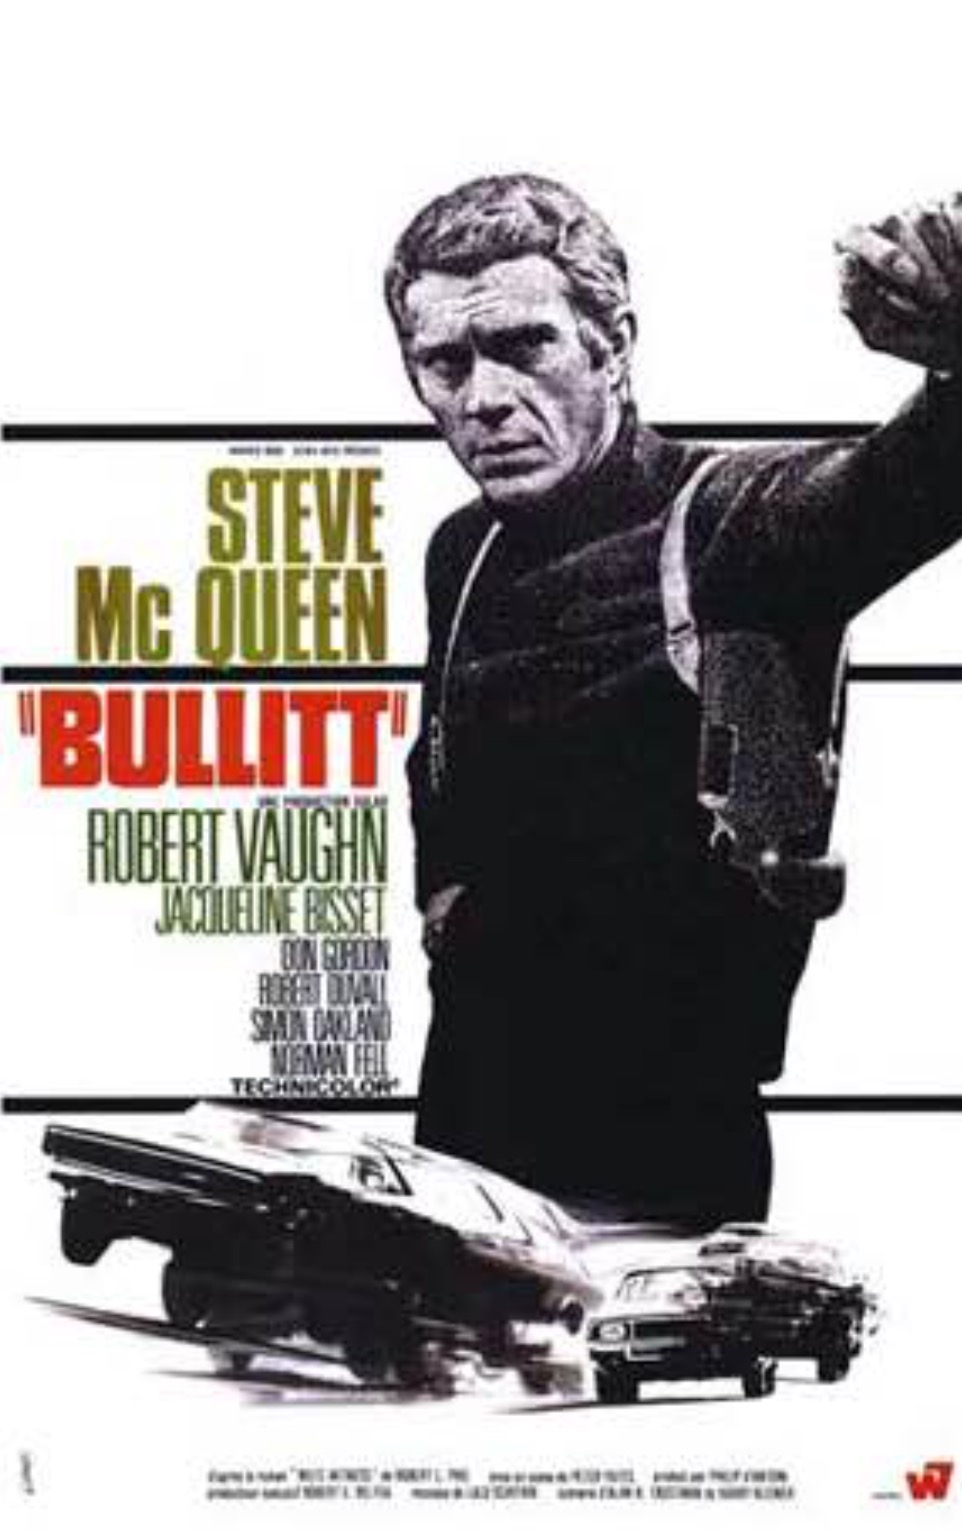 Watched Bullit for sentimental reasons tonight